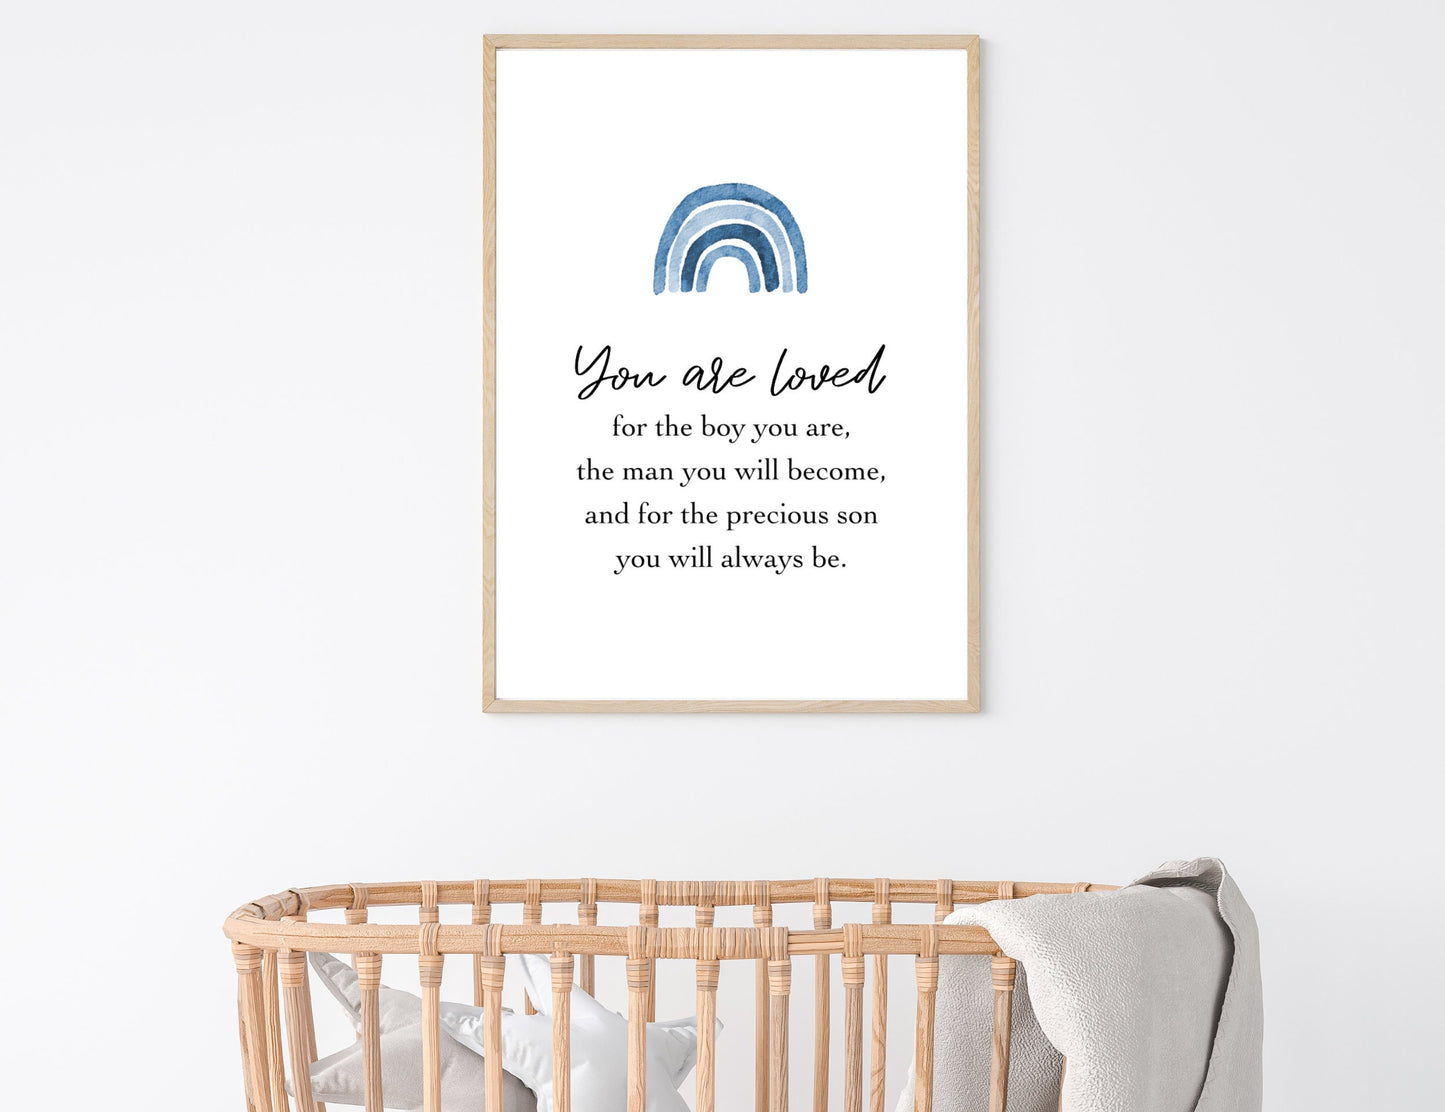 A picture showing a digital poster hung on the wall above a cradle. The digital poster has a blue rainbow, with a piece of writing that says: “You are loved for the boy you are, the man you will become, and for the precious son you will always be.”